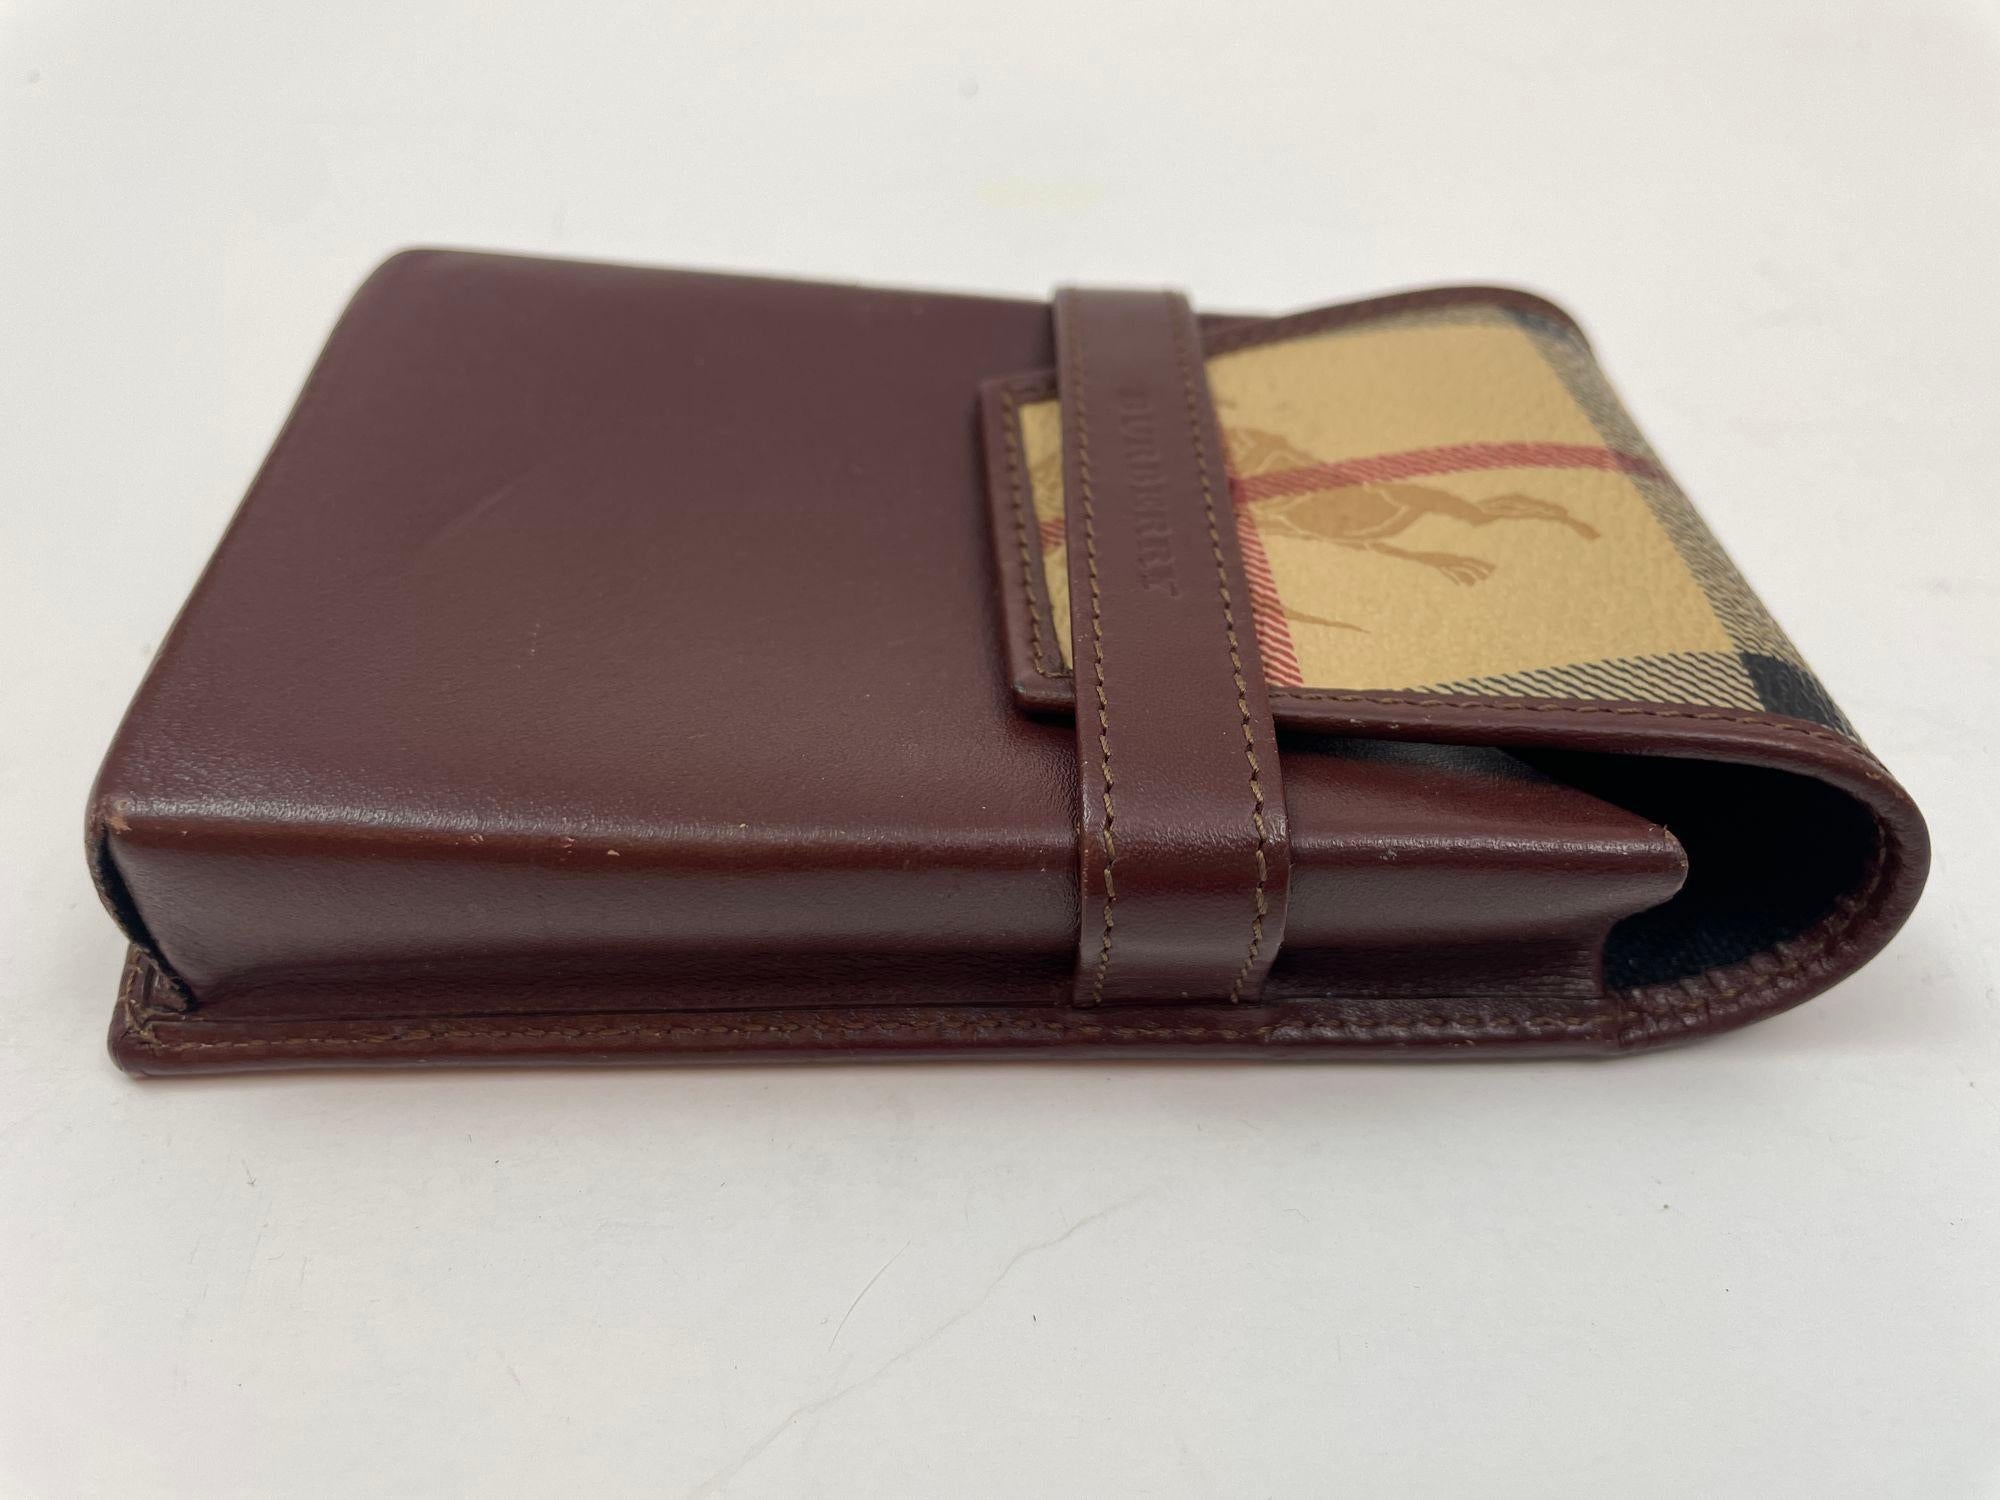 Vintage Burberry Leather Plaid Case or Wallet In Good Condition For Sale In North Hollywood, CA